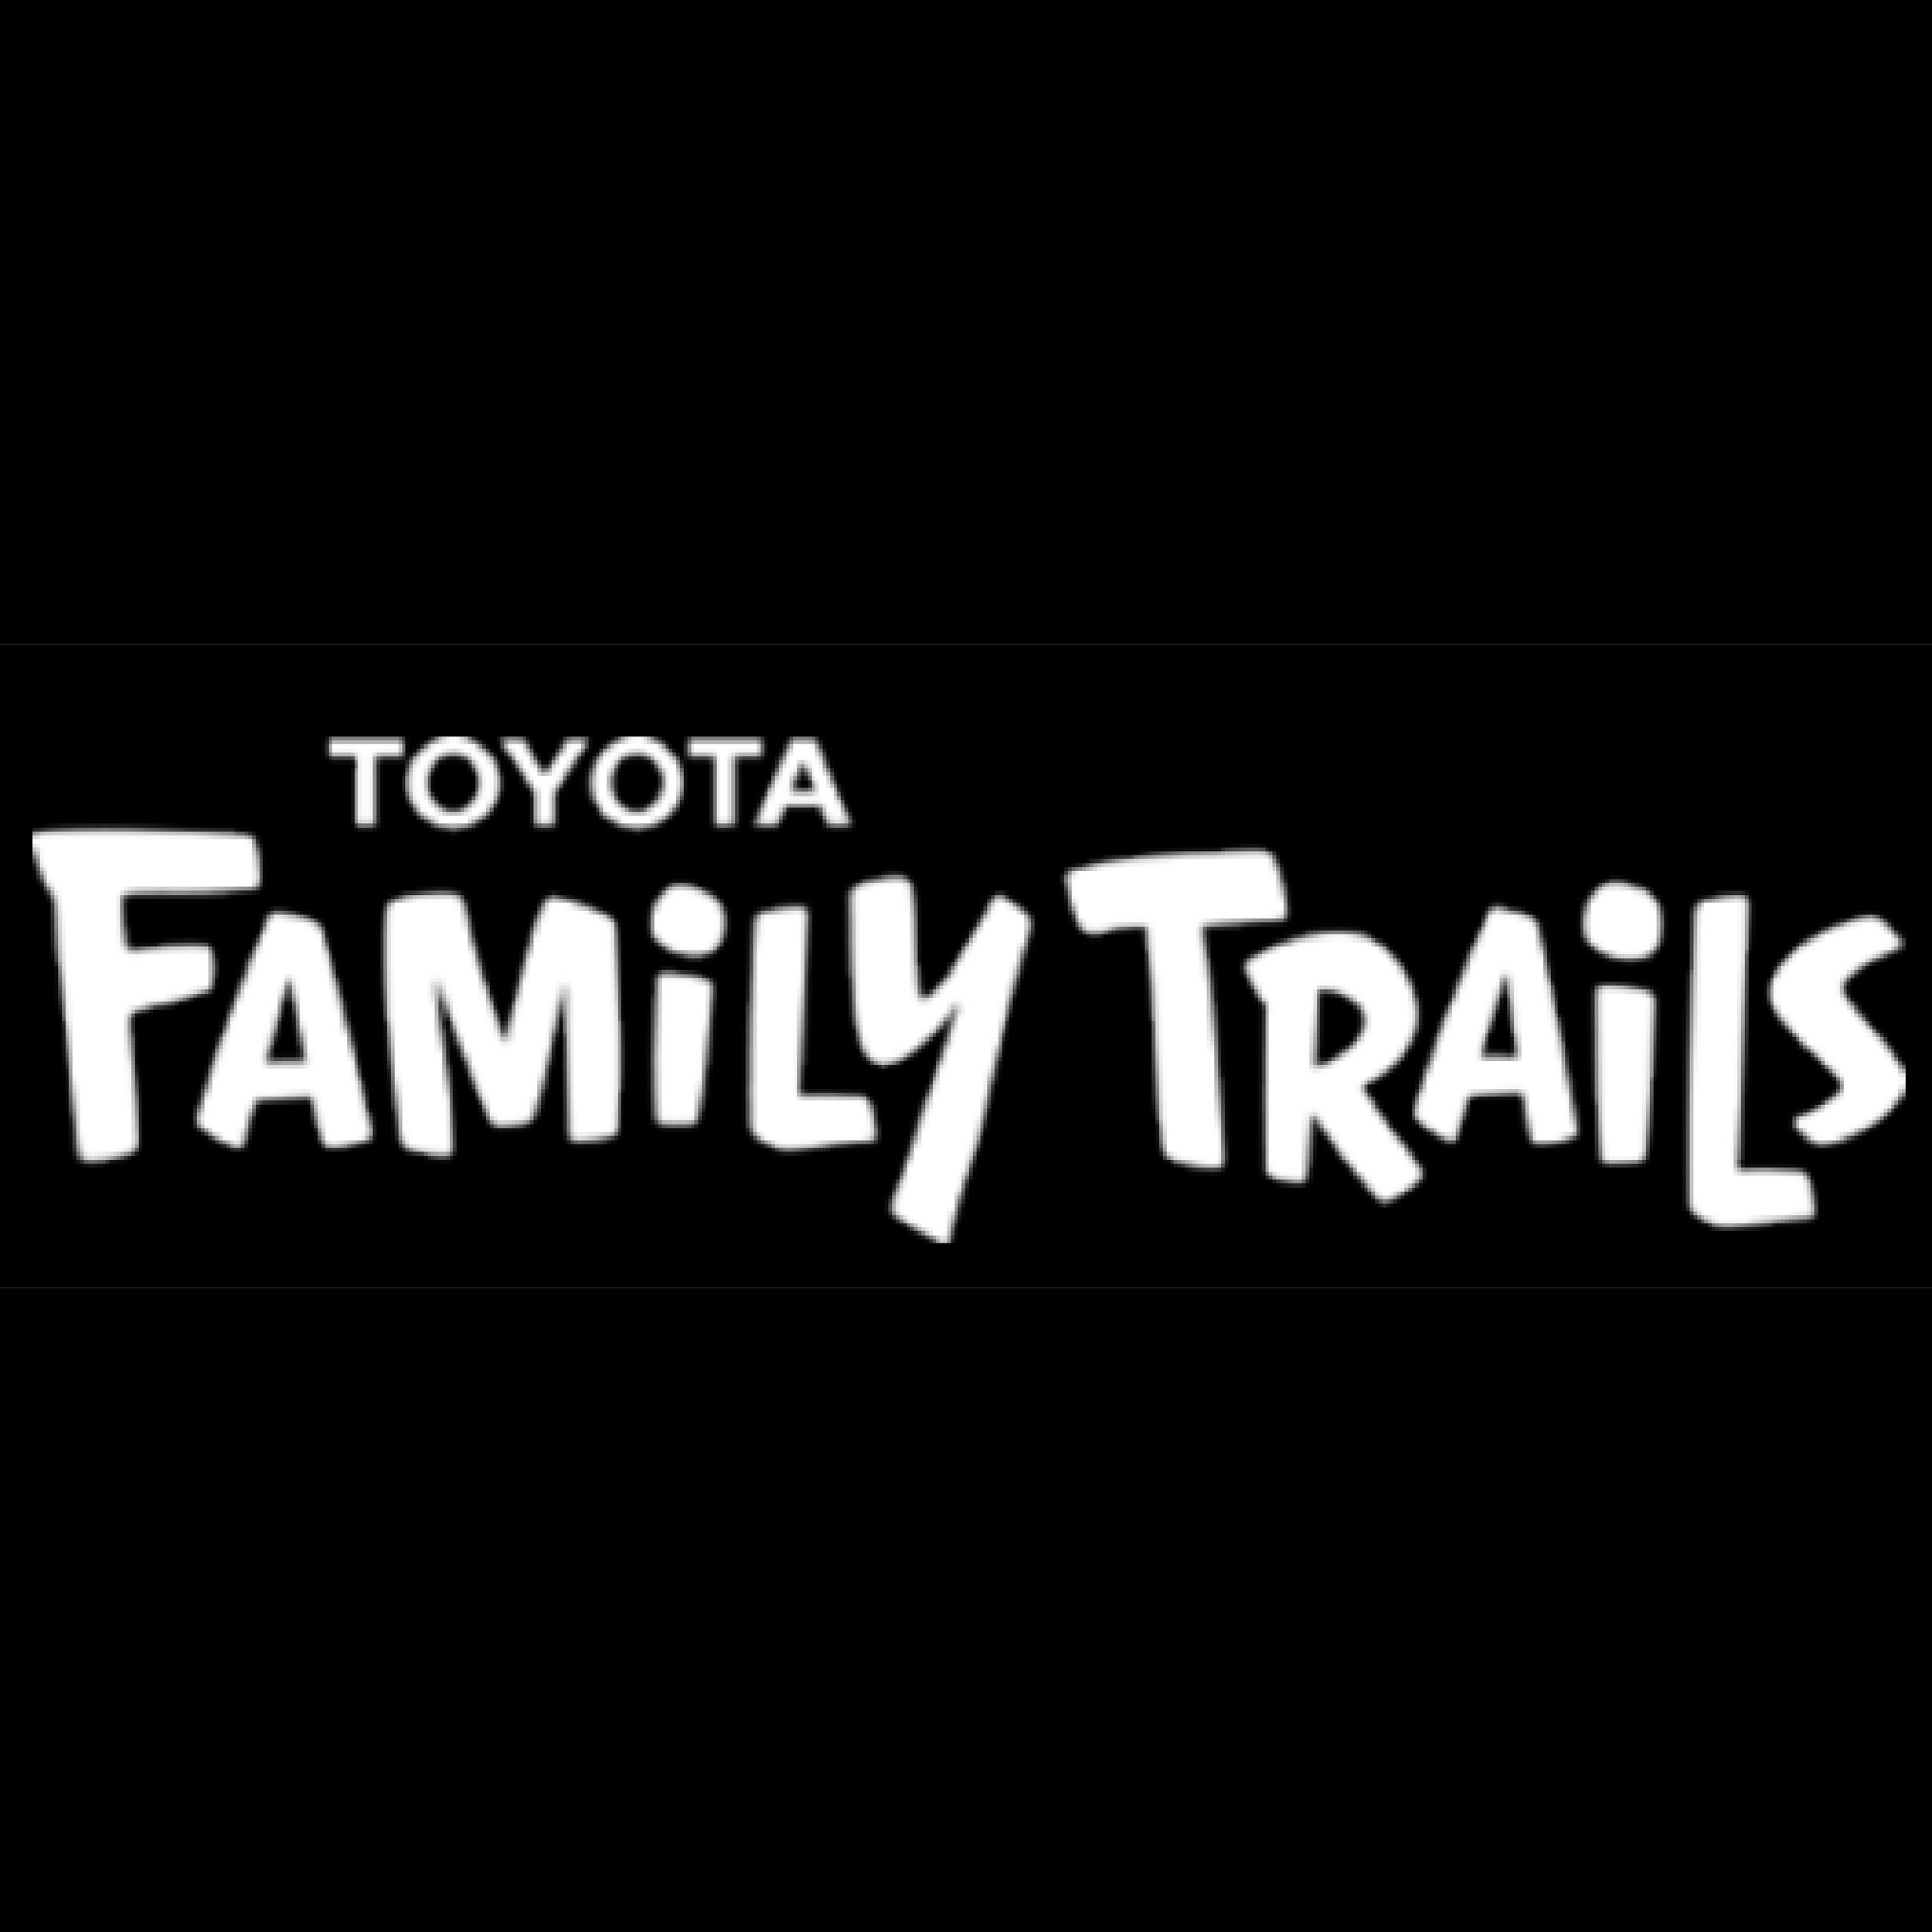 Toyota Family Trails